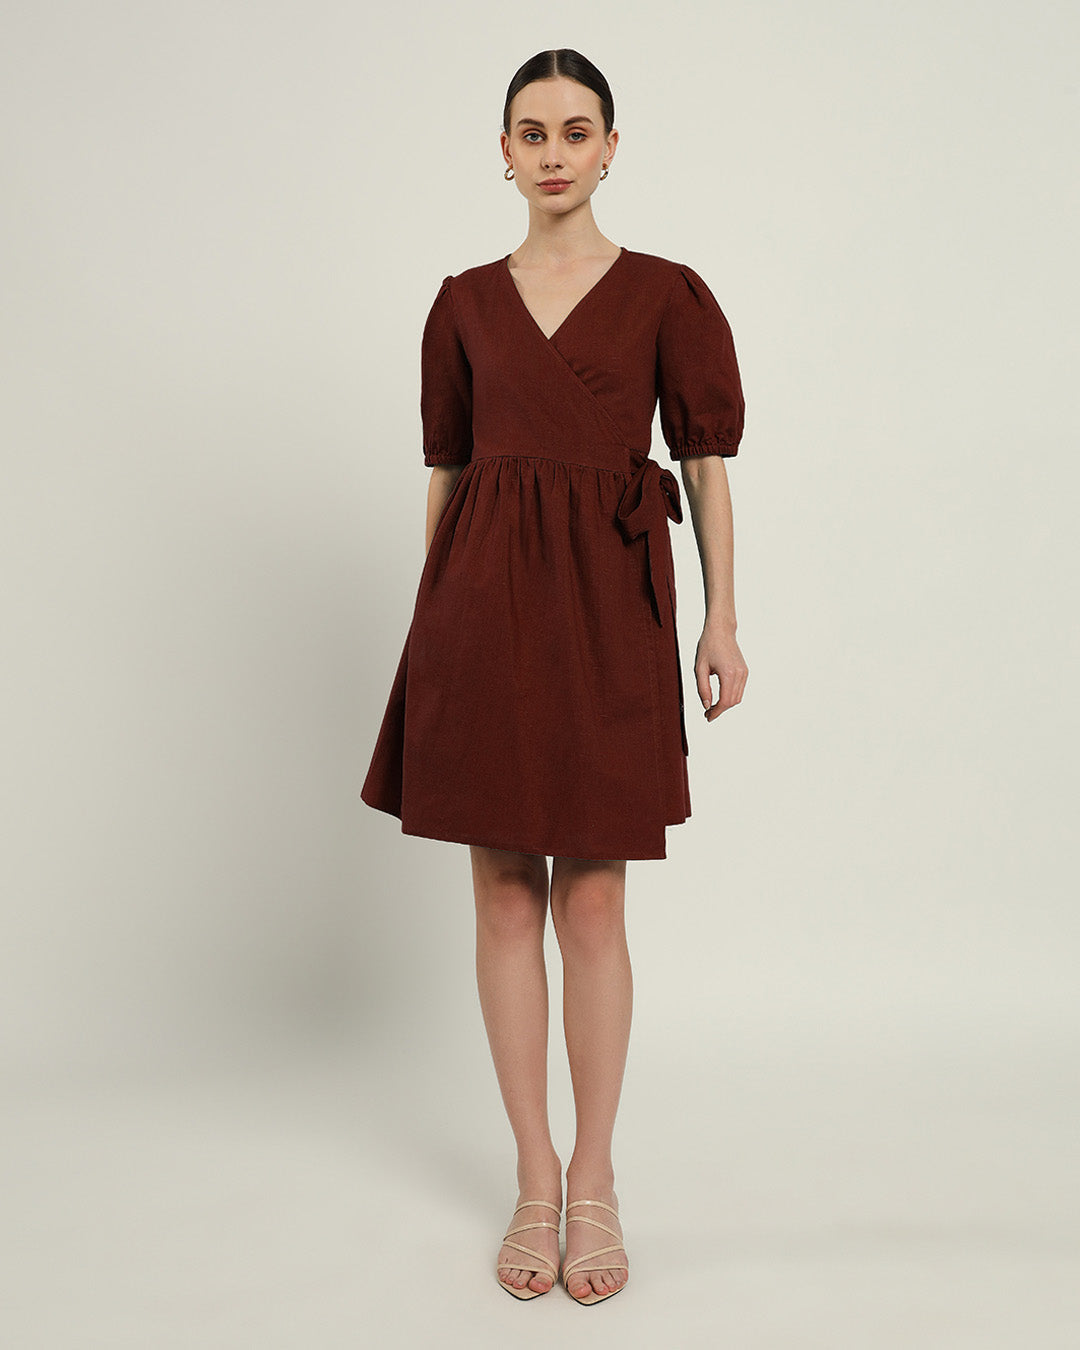 The Inzai Rouge Dress